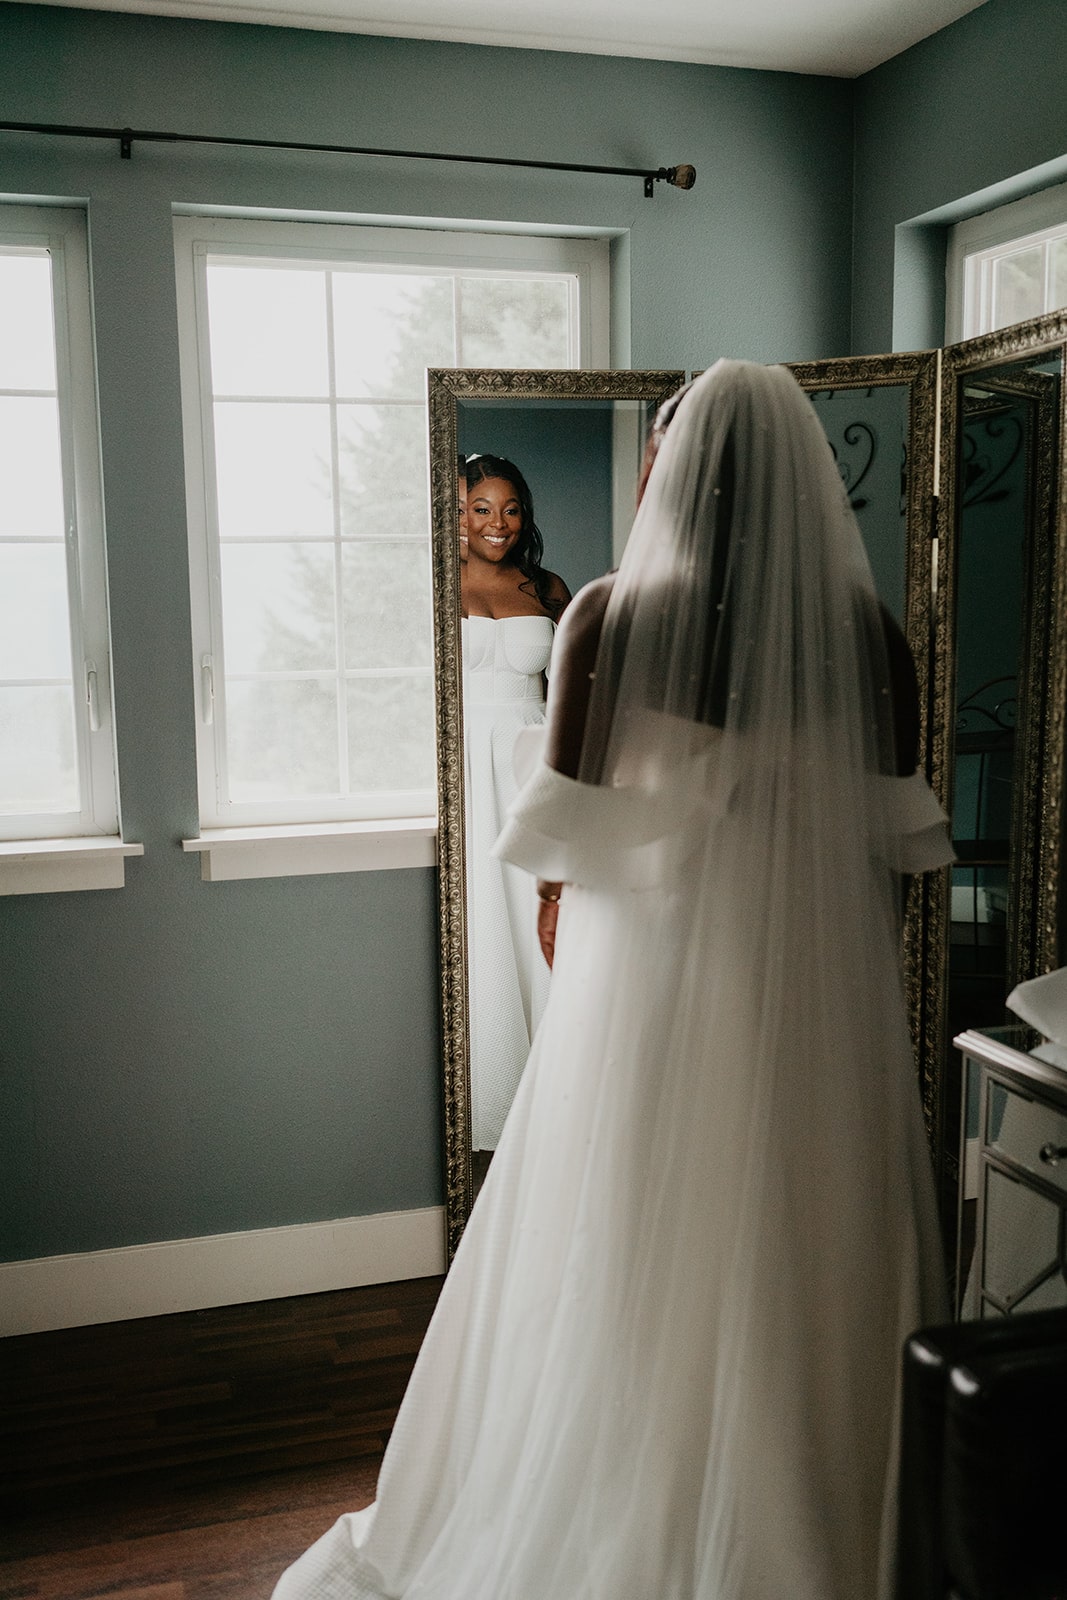 Bride smiling in front of the mirror while wearing her white wedding dress and veil